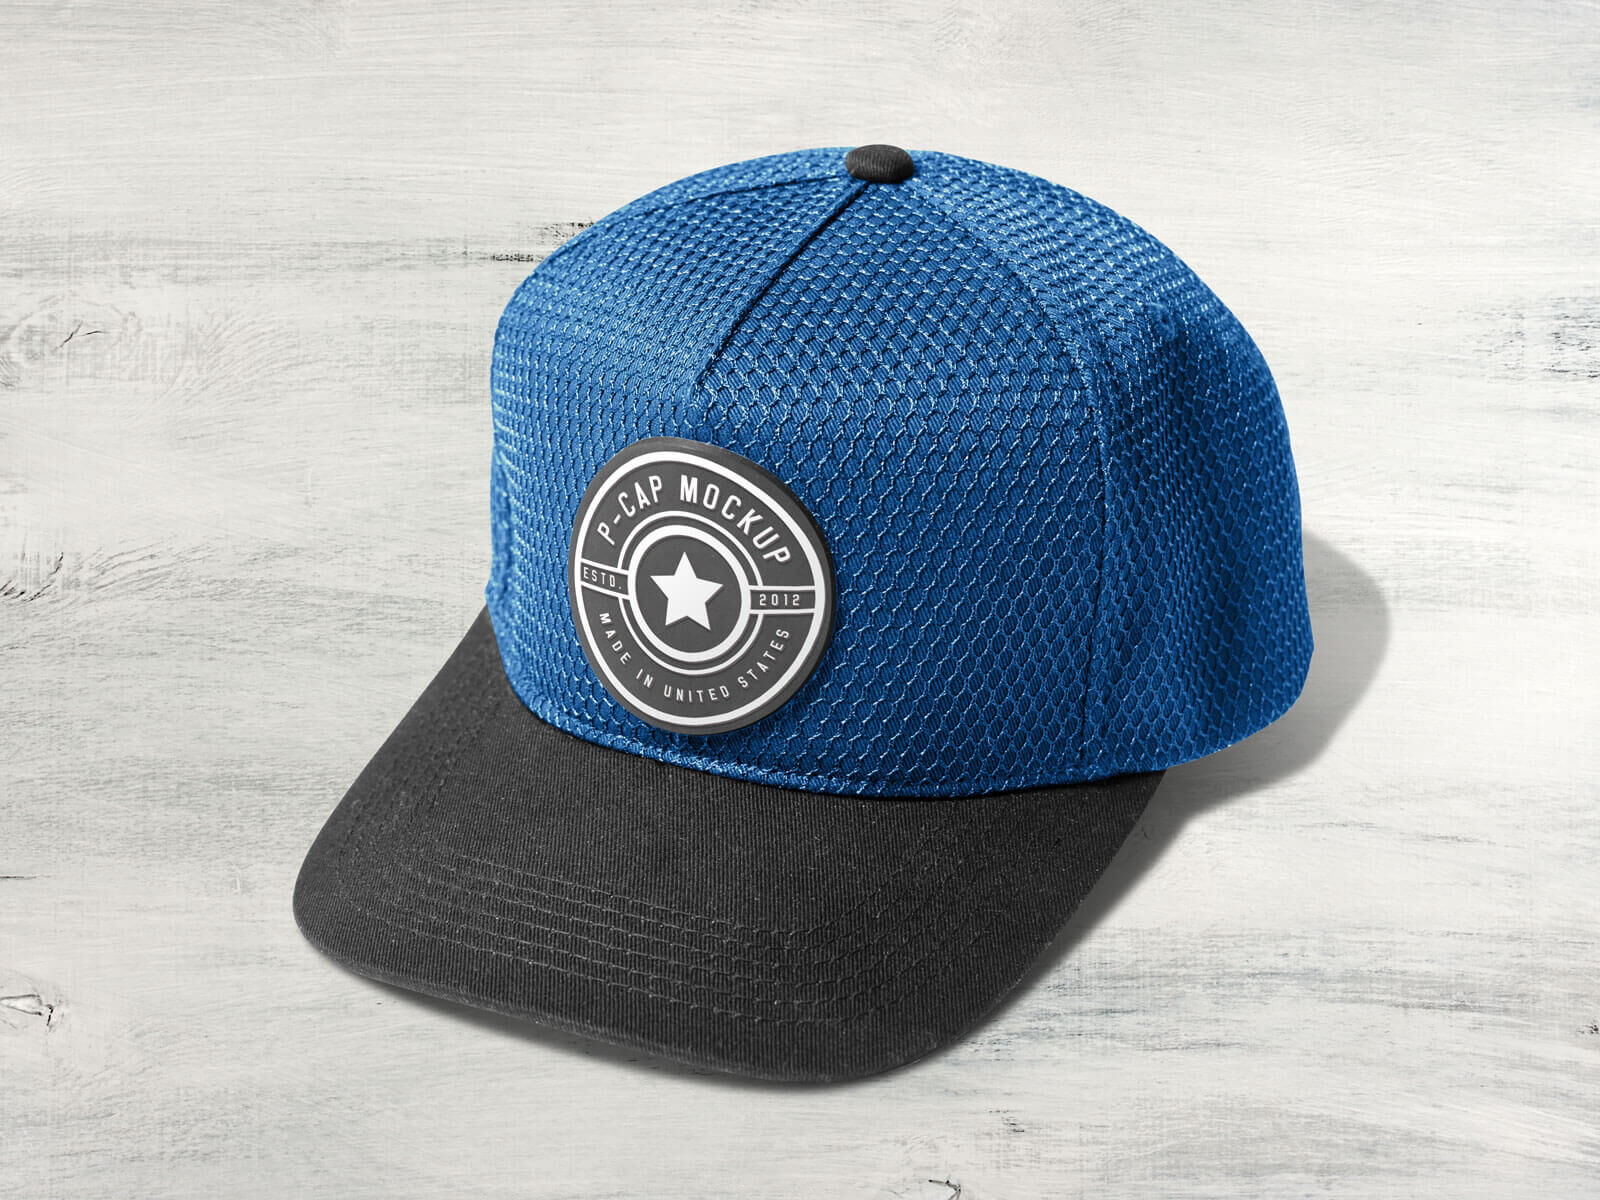 Mockup Featuring a Polyester Mesh Breathable Baseball P Cap FREE PSD